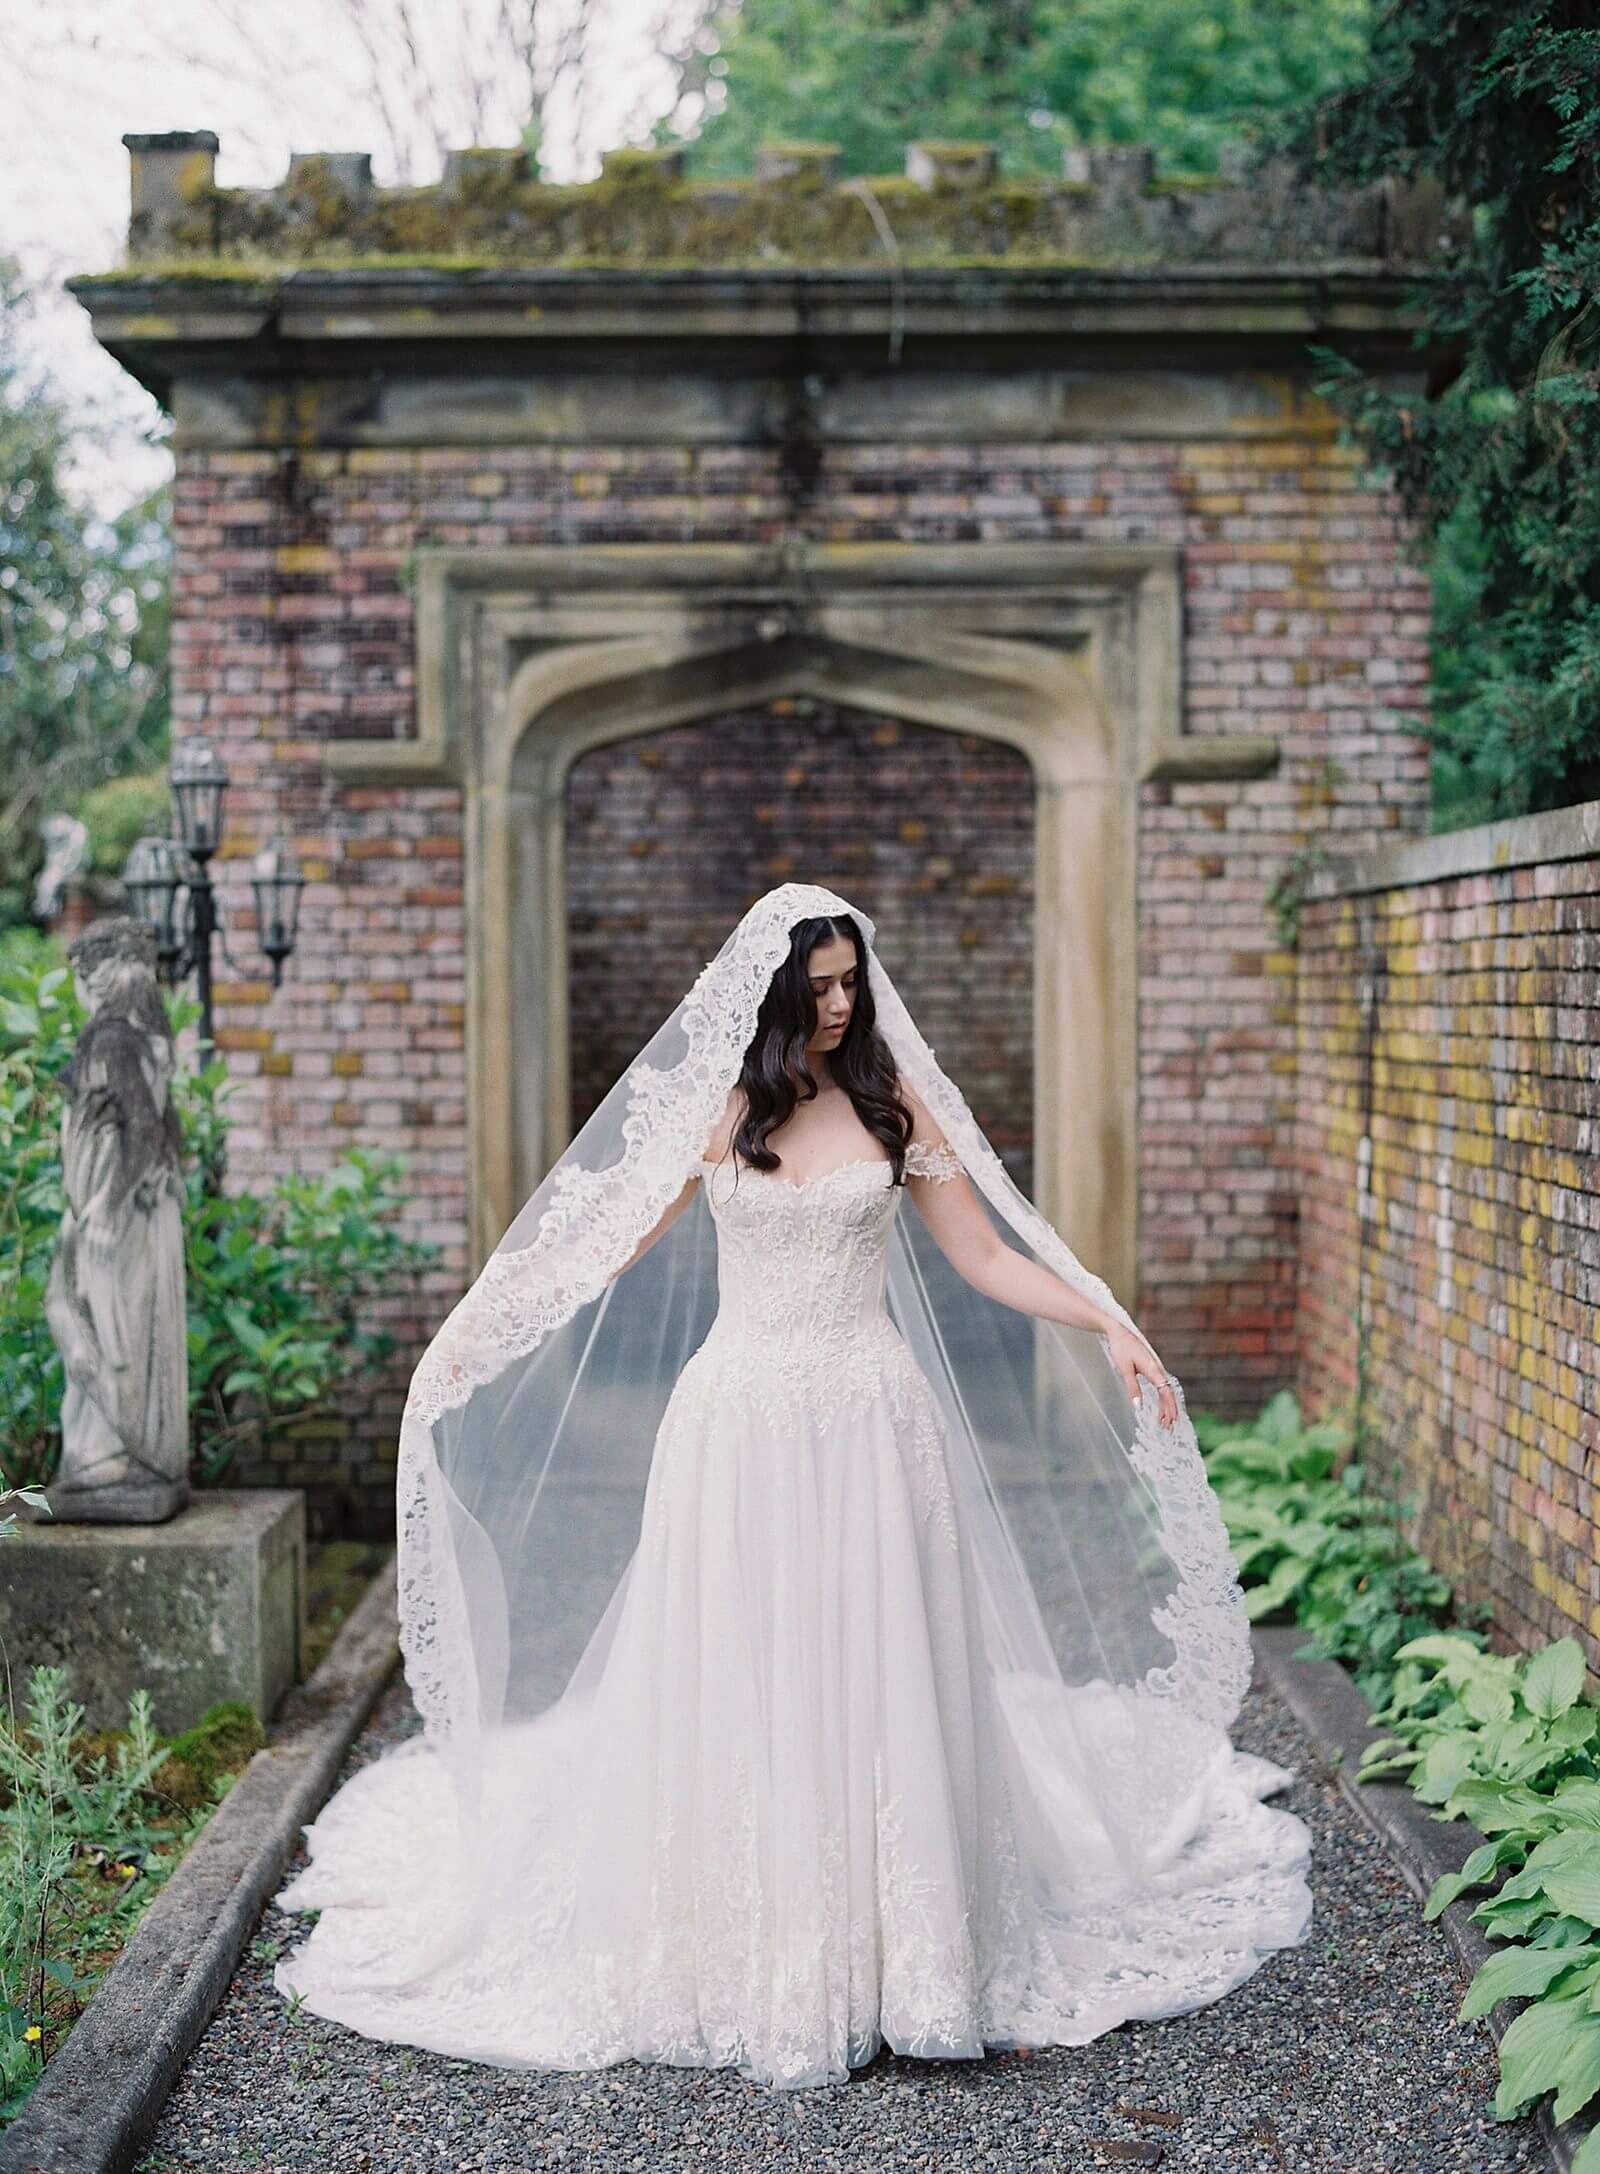 Bride lifts mantilla lace cathedral veil in Ines di Santo gown in Thornewood Castle garden - Jacqueline Benét Photography